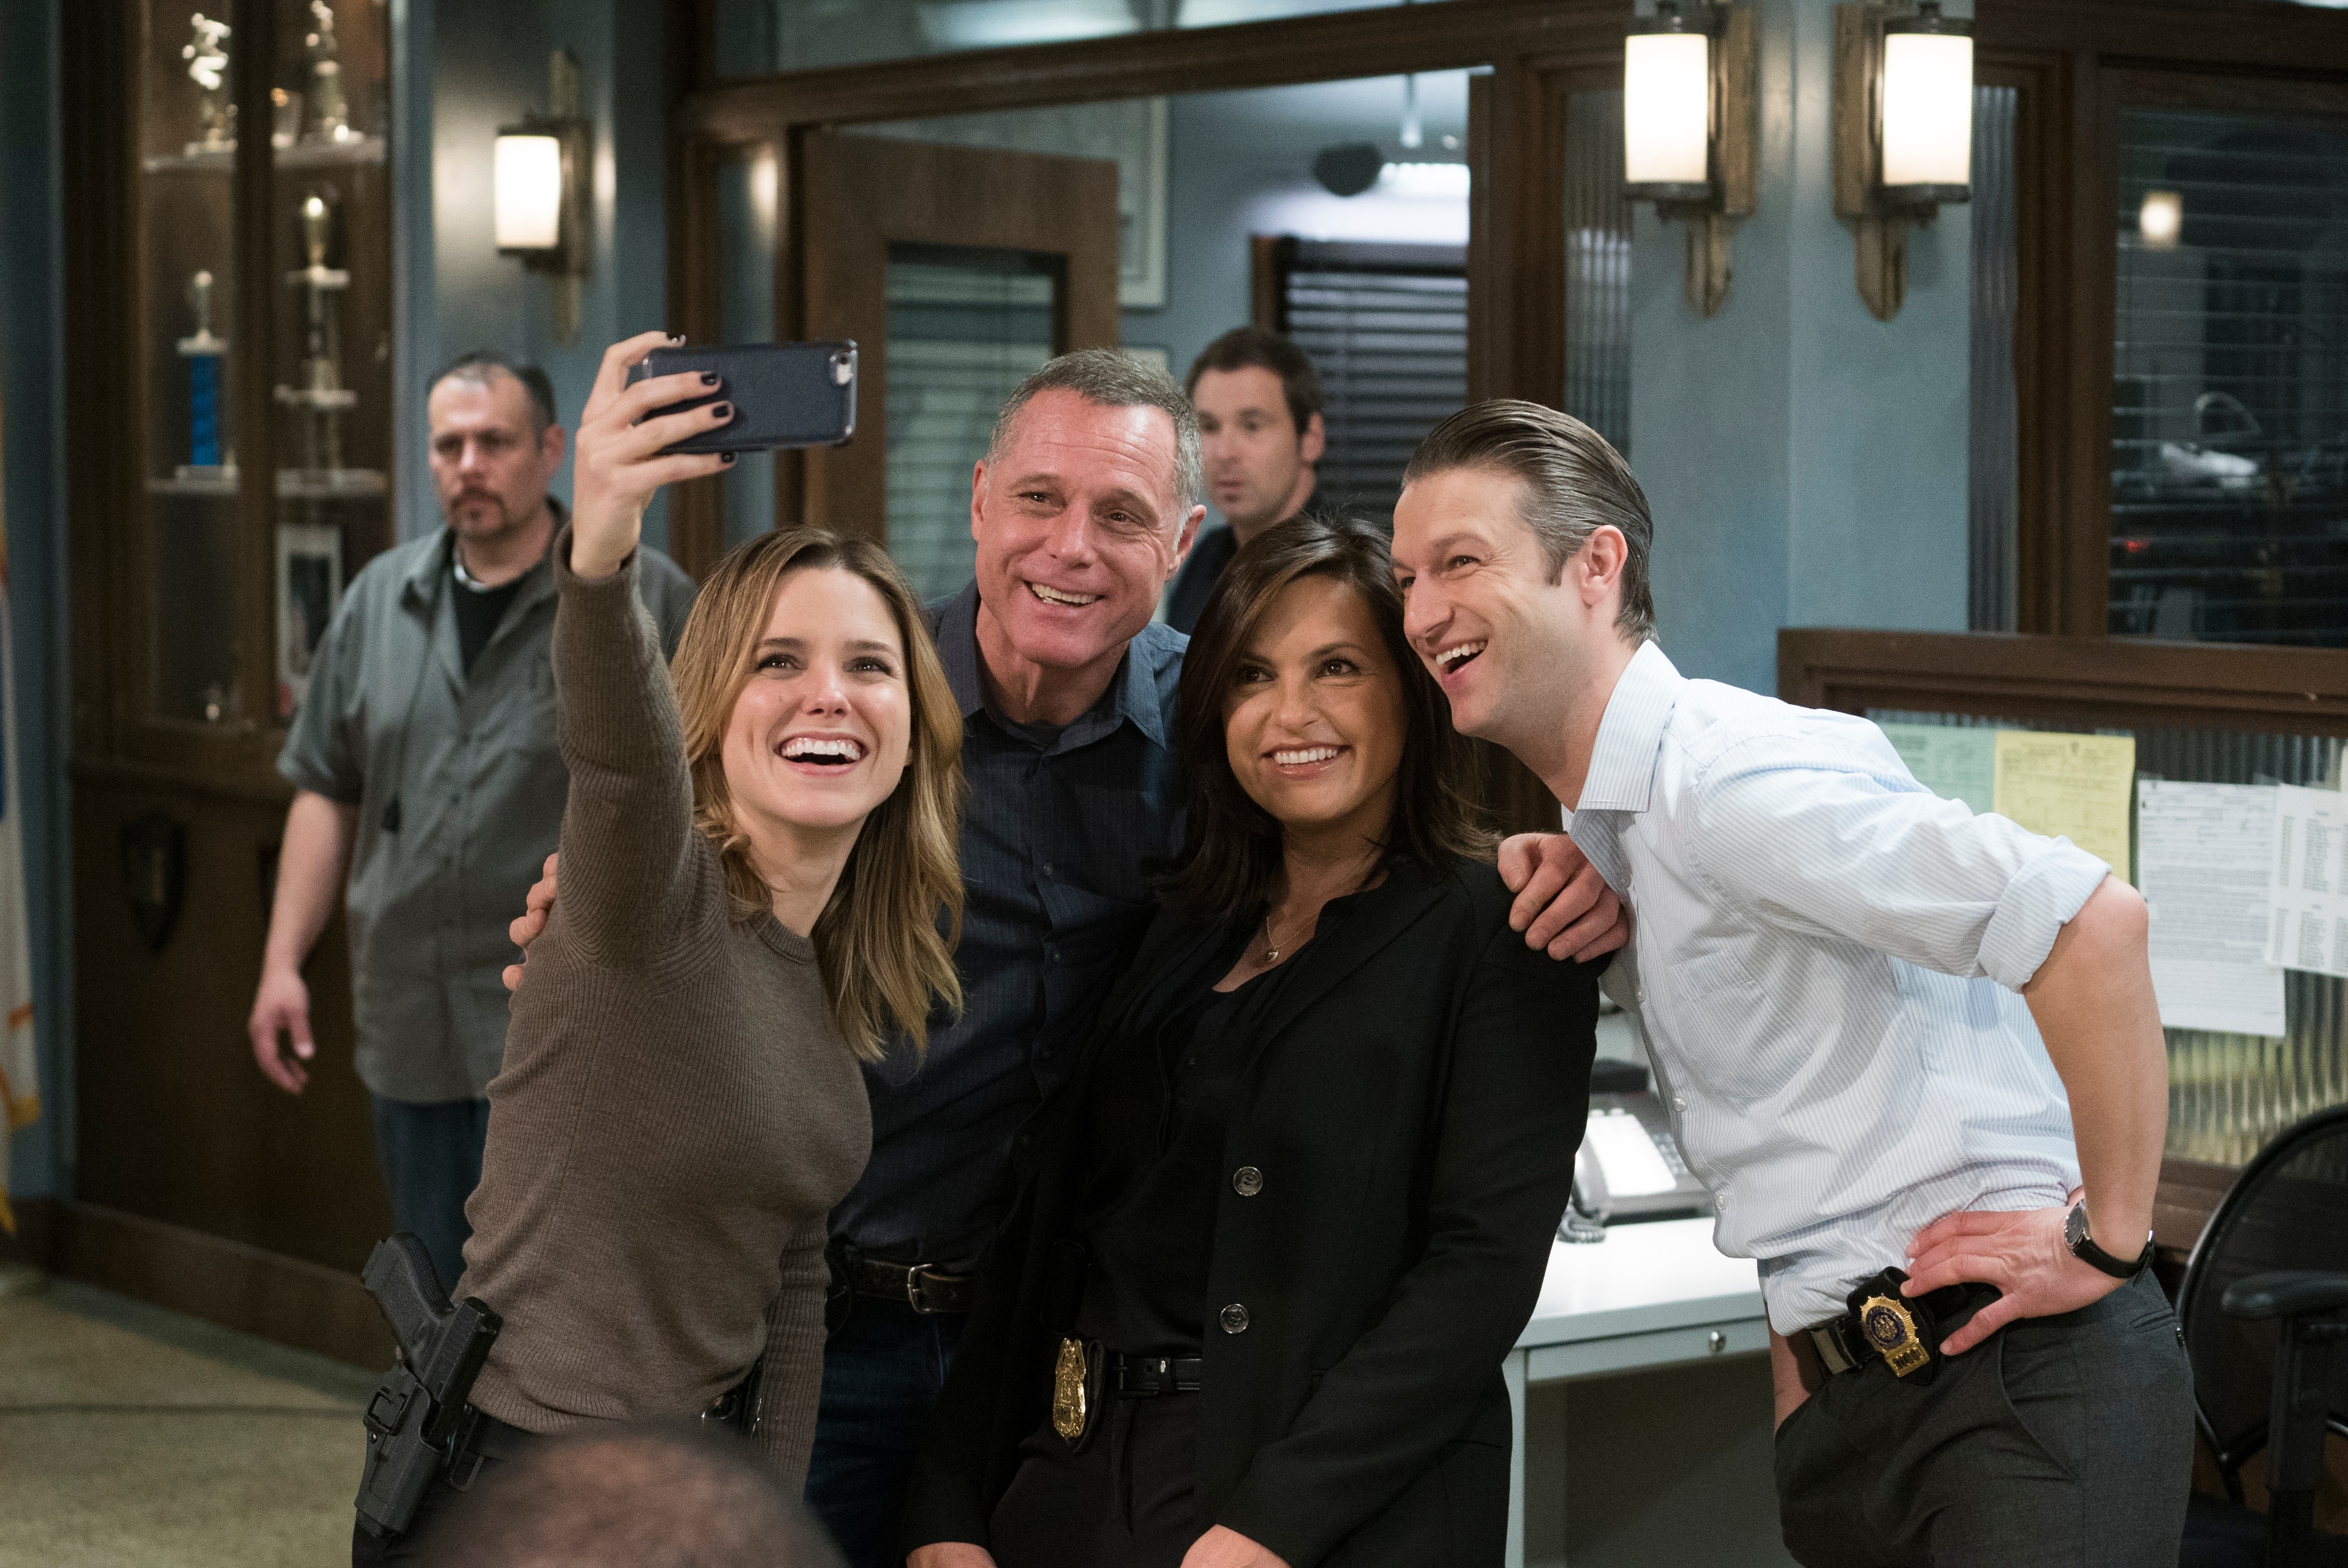 Law & Order: Special Victims Unit: Behind the Scenes of "Daydream